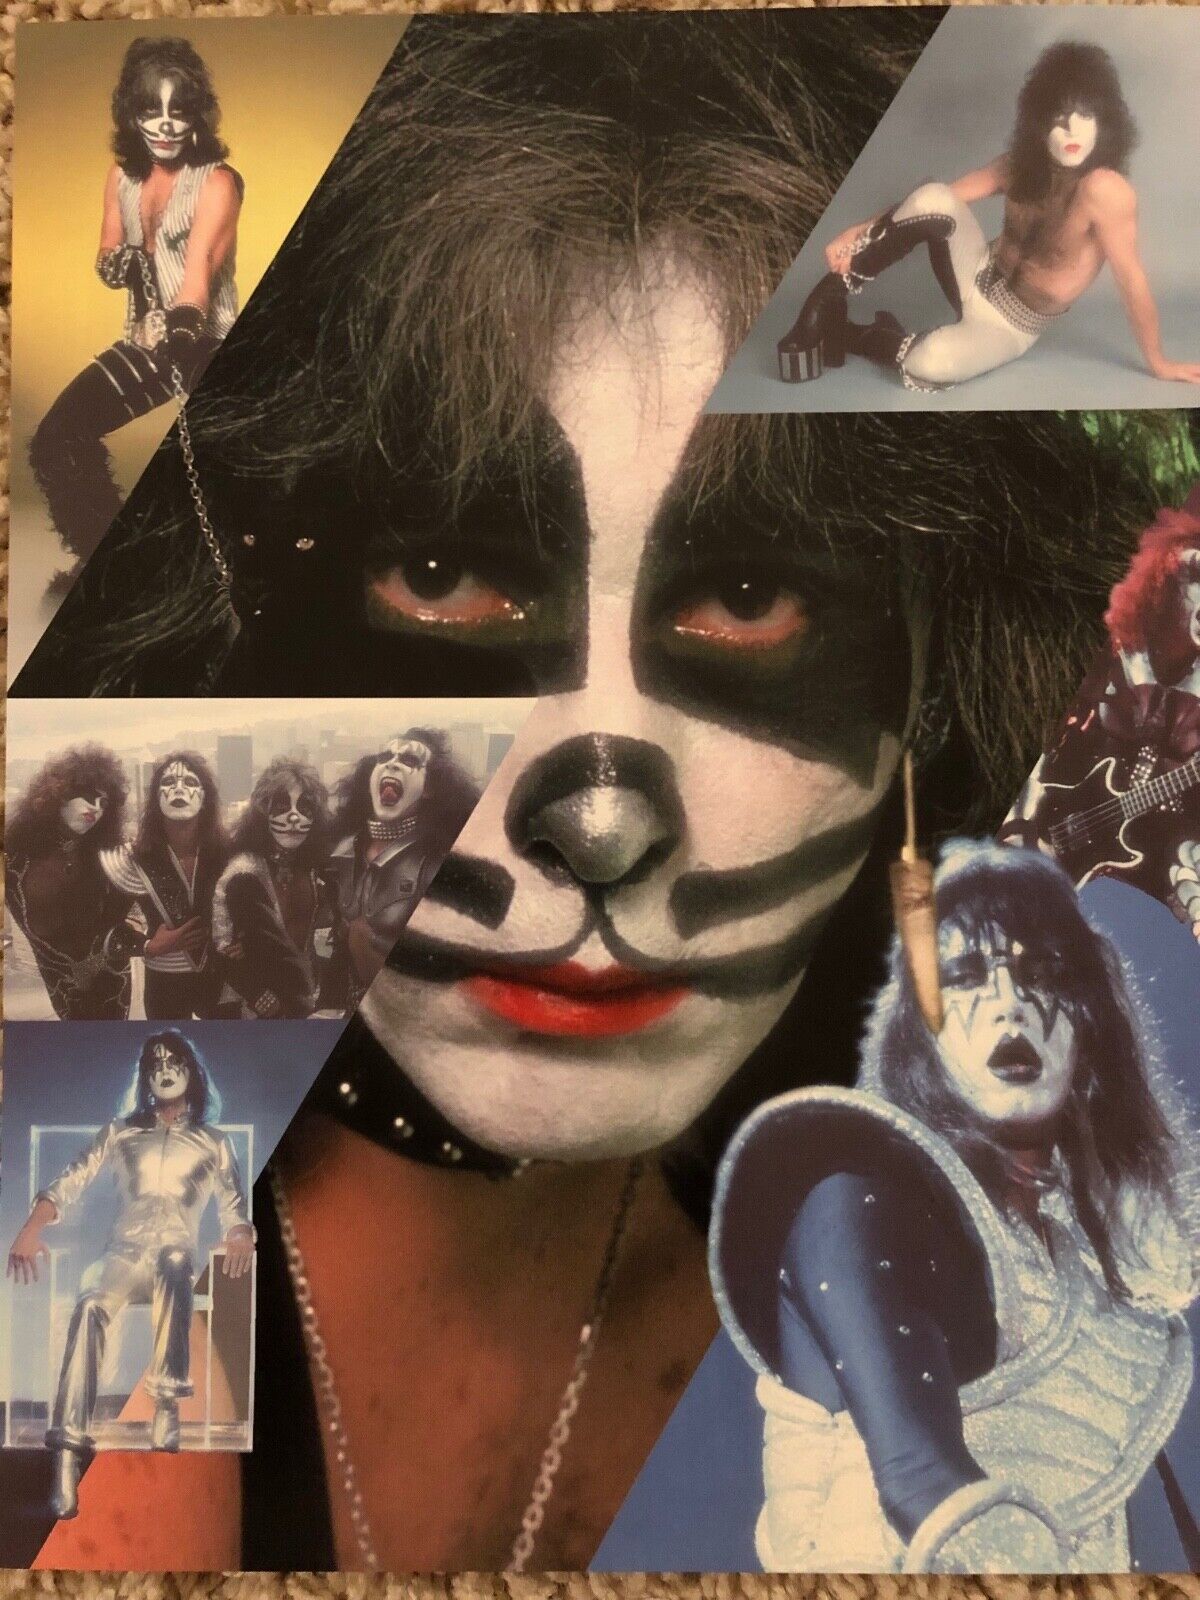 KISS individual photo signed by Gene Simmons and Paul Stanle (4 pictures) JSA Без бренда - фотография #8